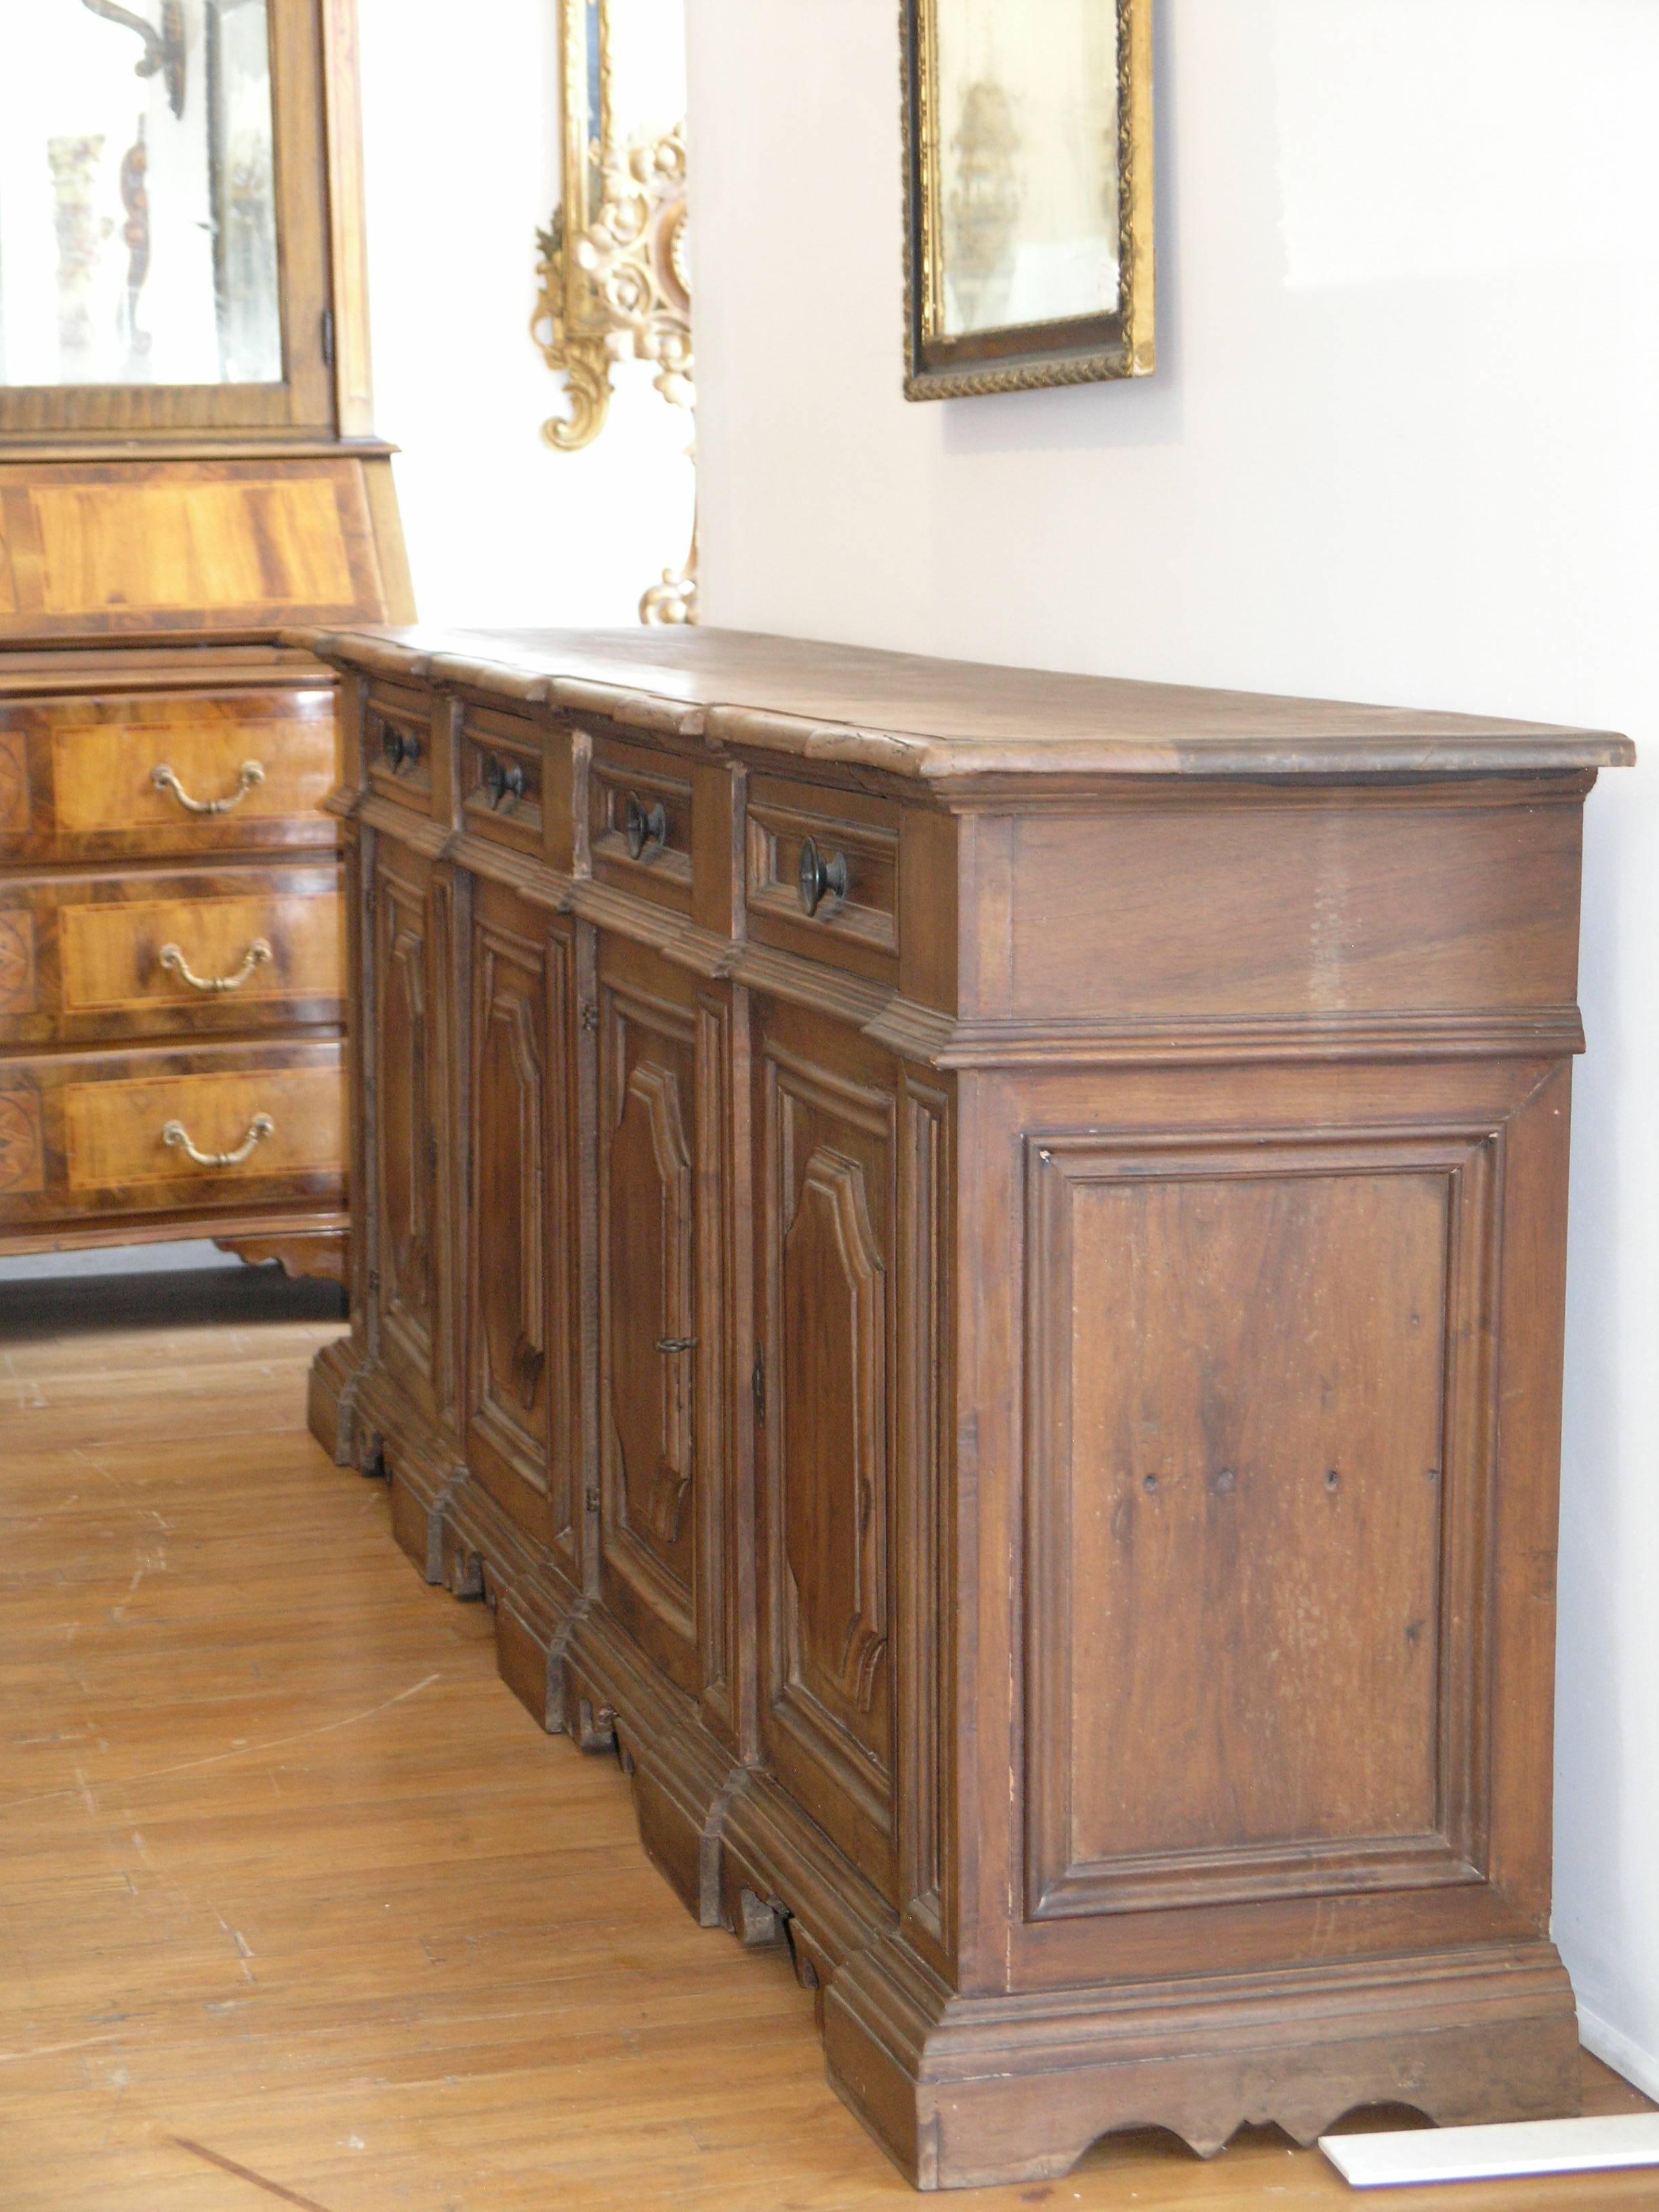 Rectangular top with molded edge over four drawers, above four-paneled doors raised on bracket feet.